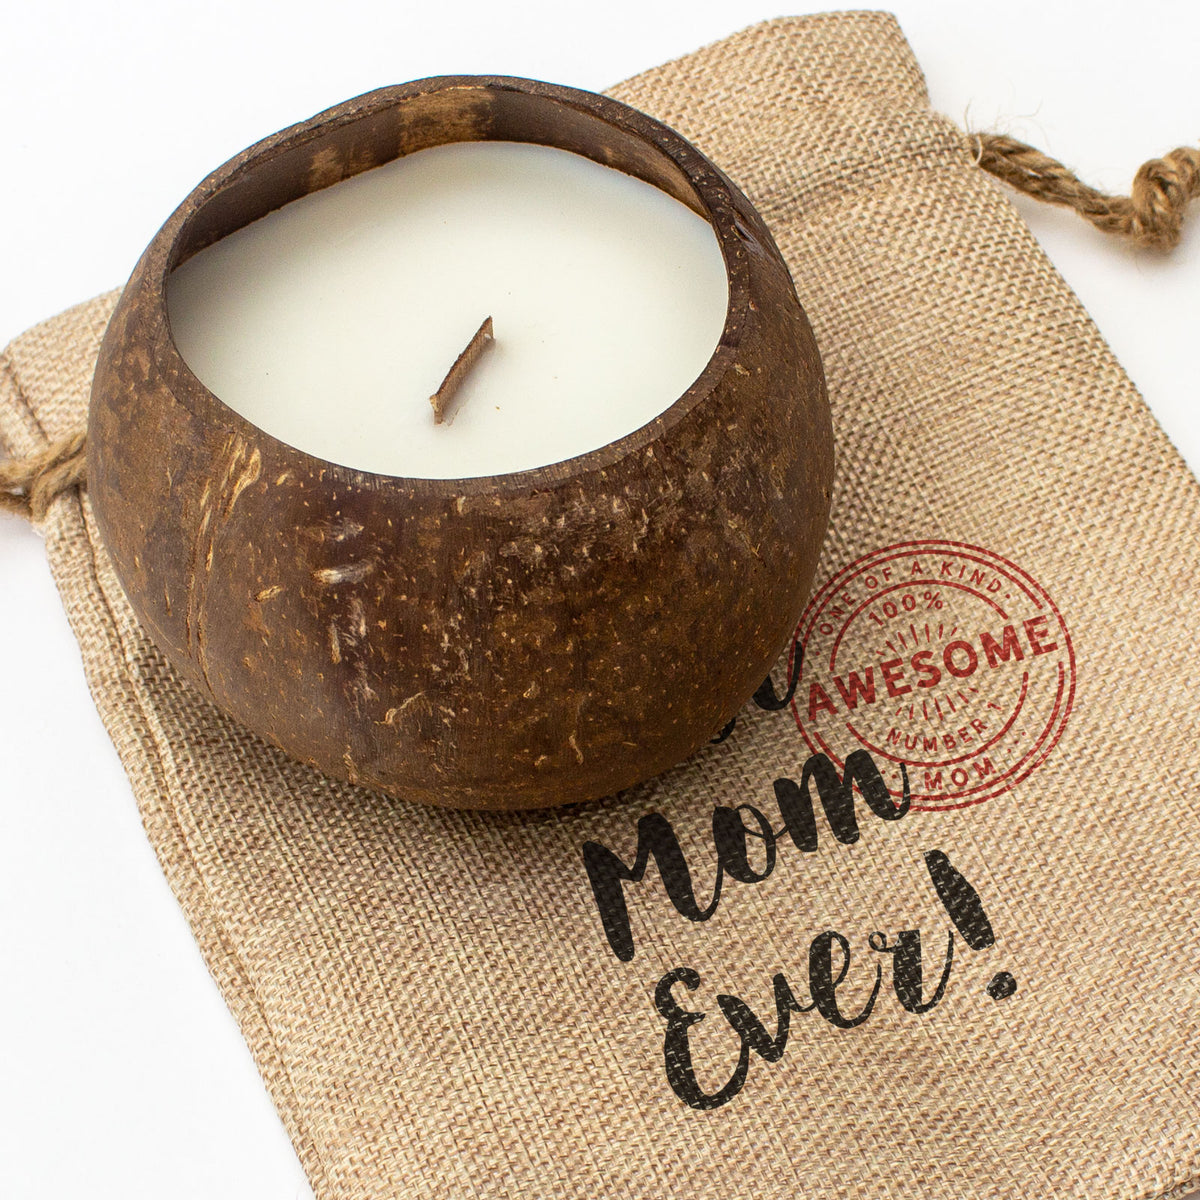 BEST MOM EVER - Toasted Coconut Bowl Candle – Soy Wax - Gift Present